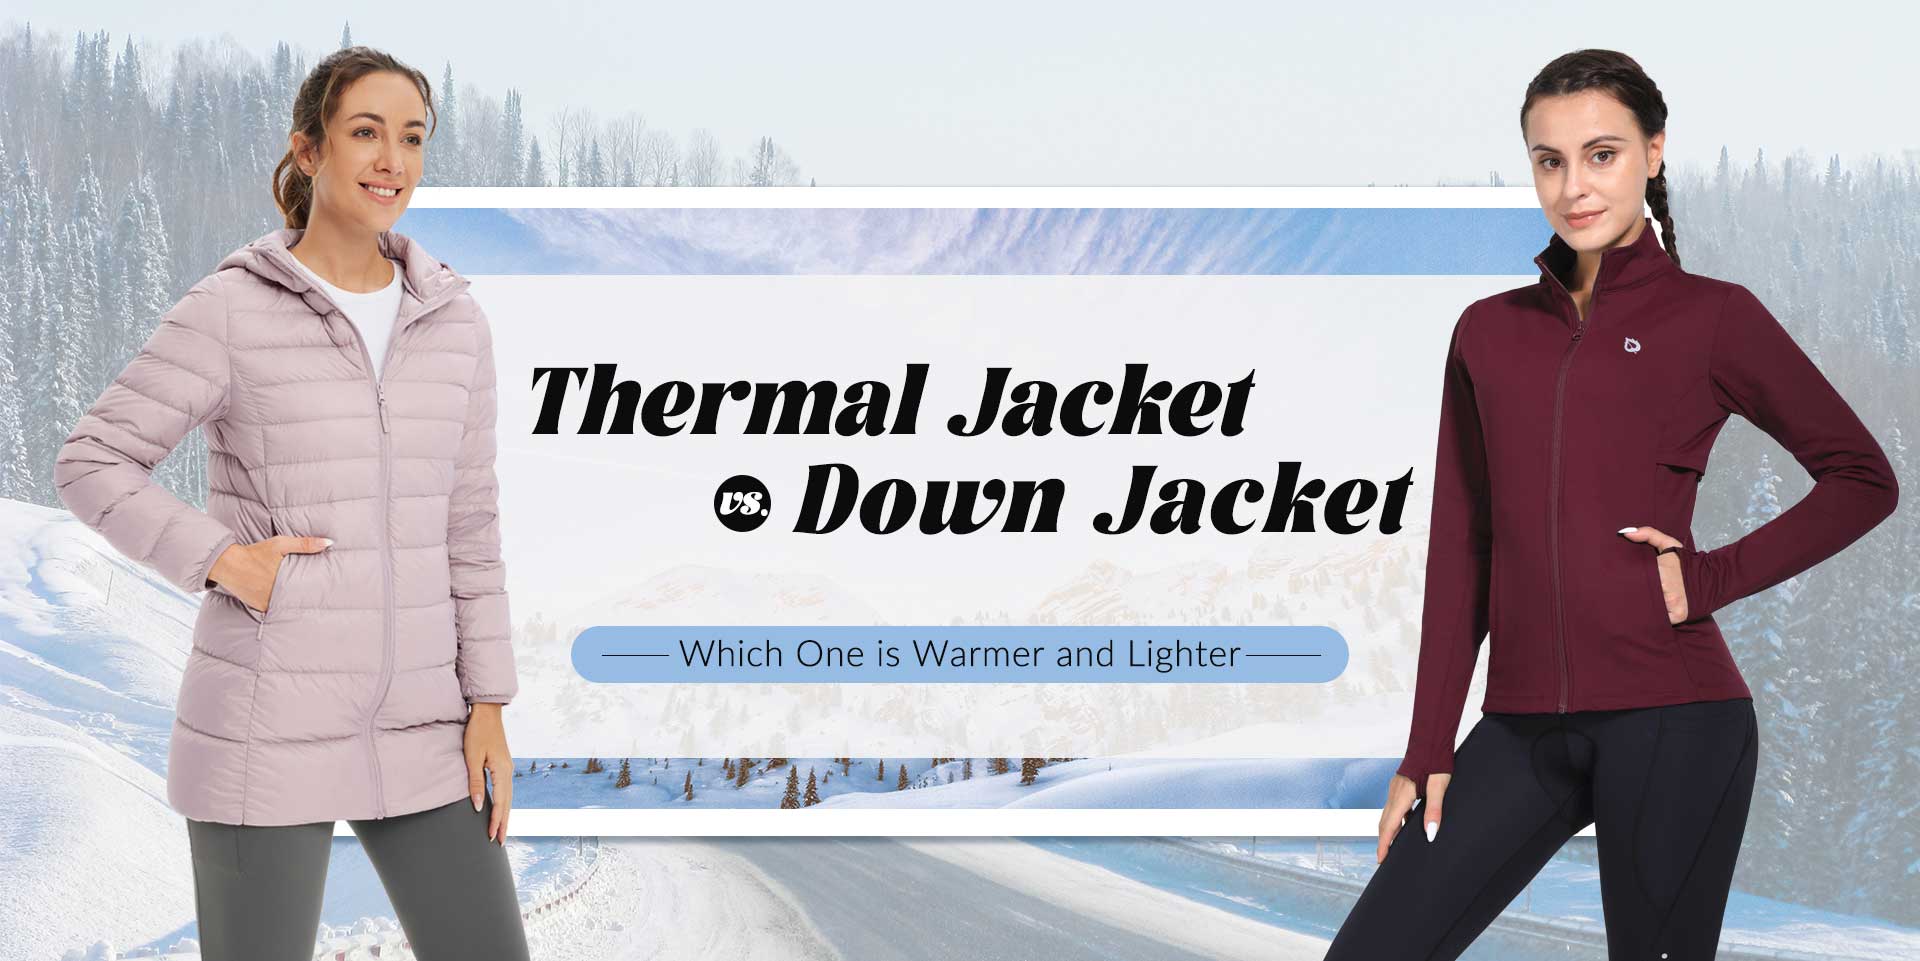 Thermal Jacket vs. Down Jacket: Which One is Warmer and Lighter